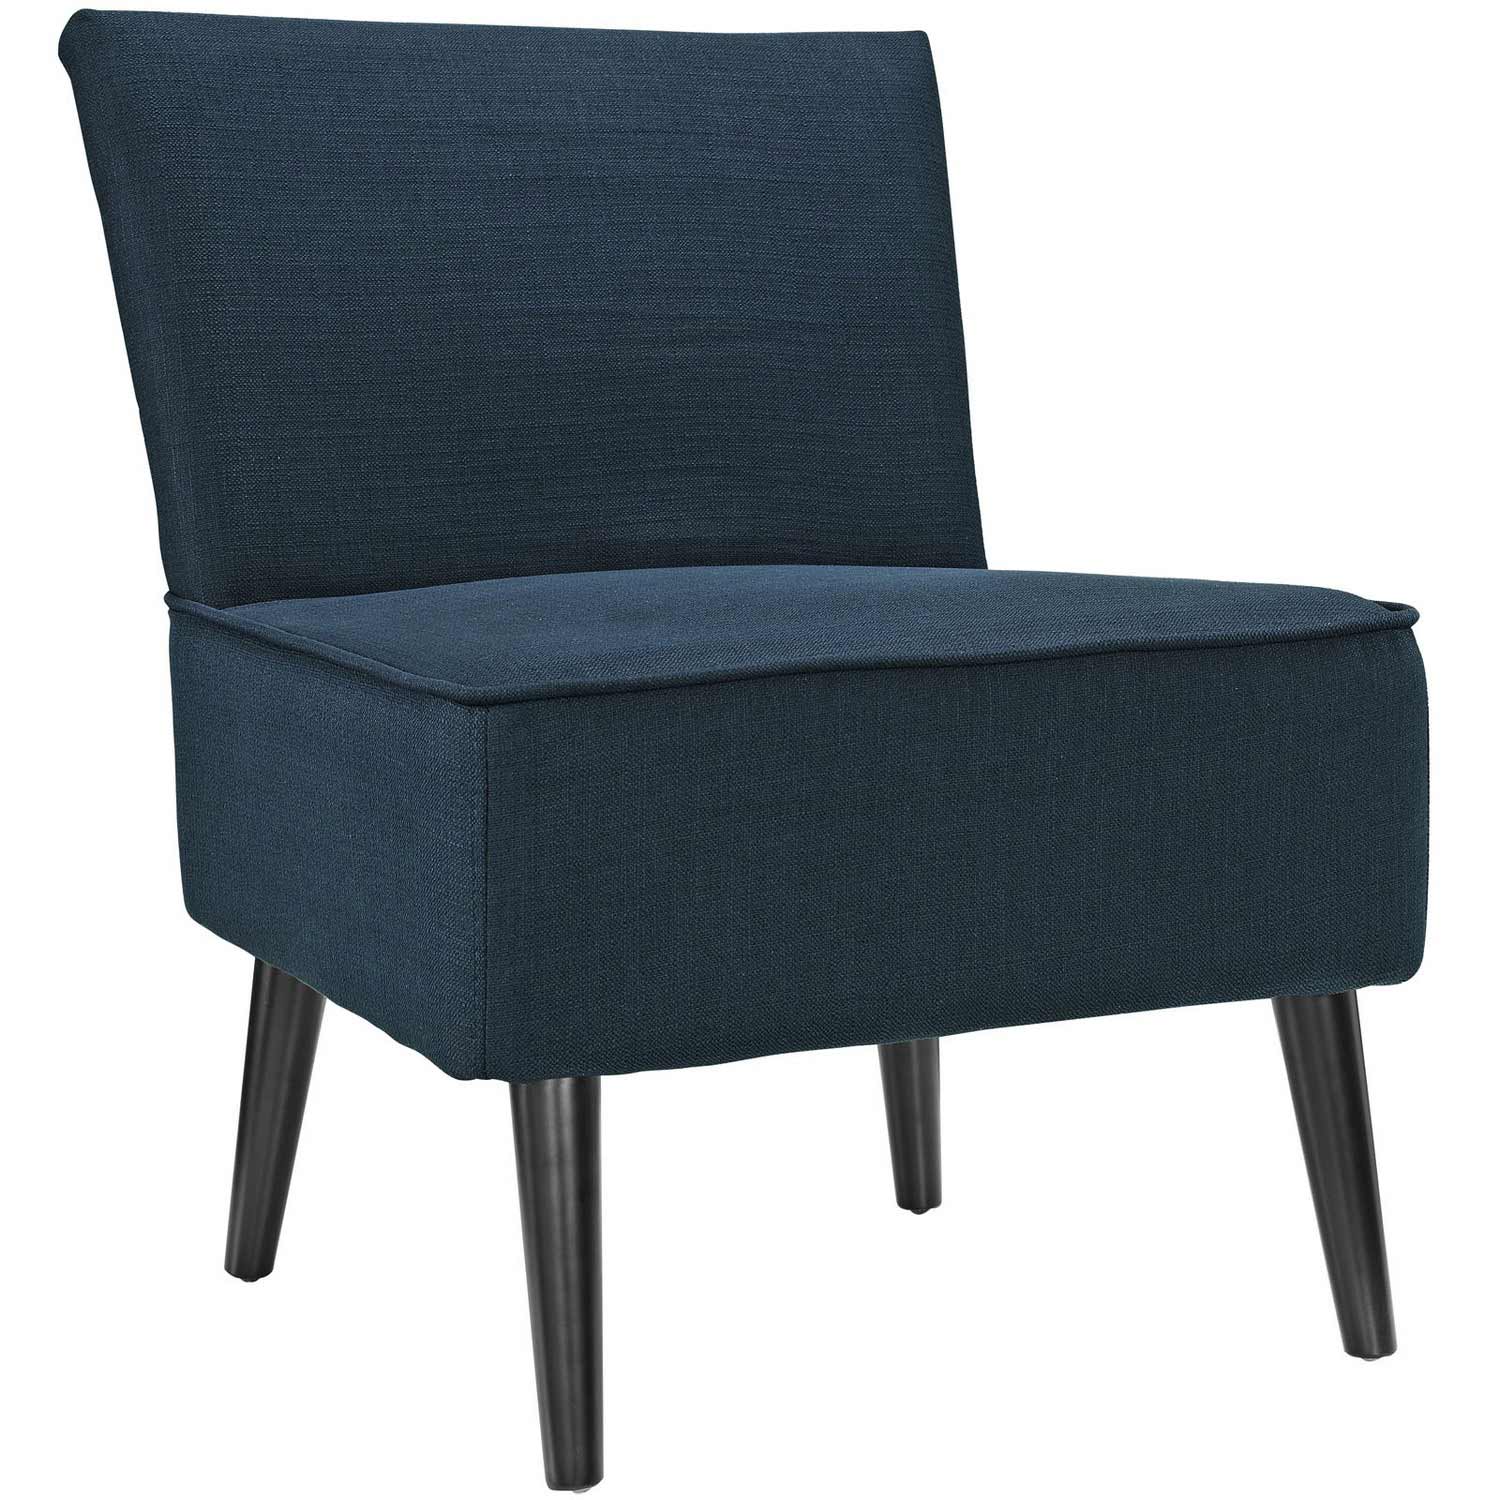 Modway Reef Fabric Side Chair - Azure